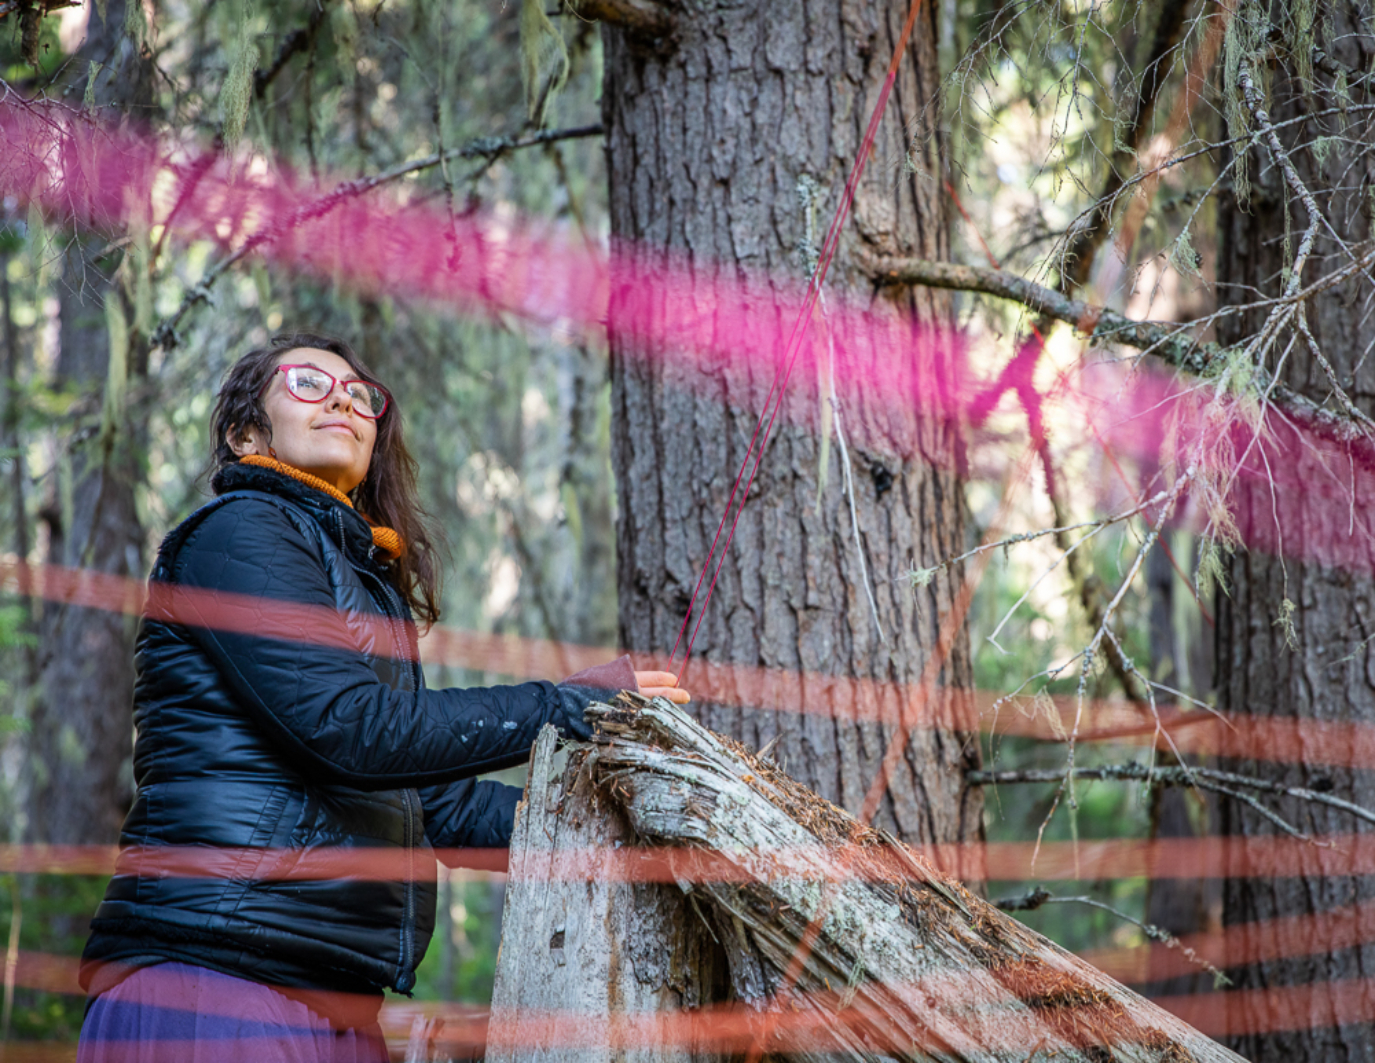 The artist looks up with a smile at the Dream Puppet, now installed in the forest. There are blurred pink and red lines that hold the puppet in place.